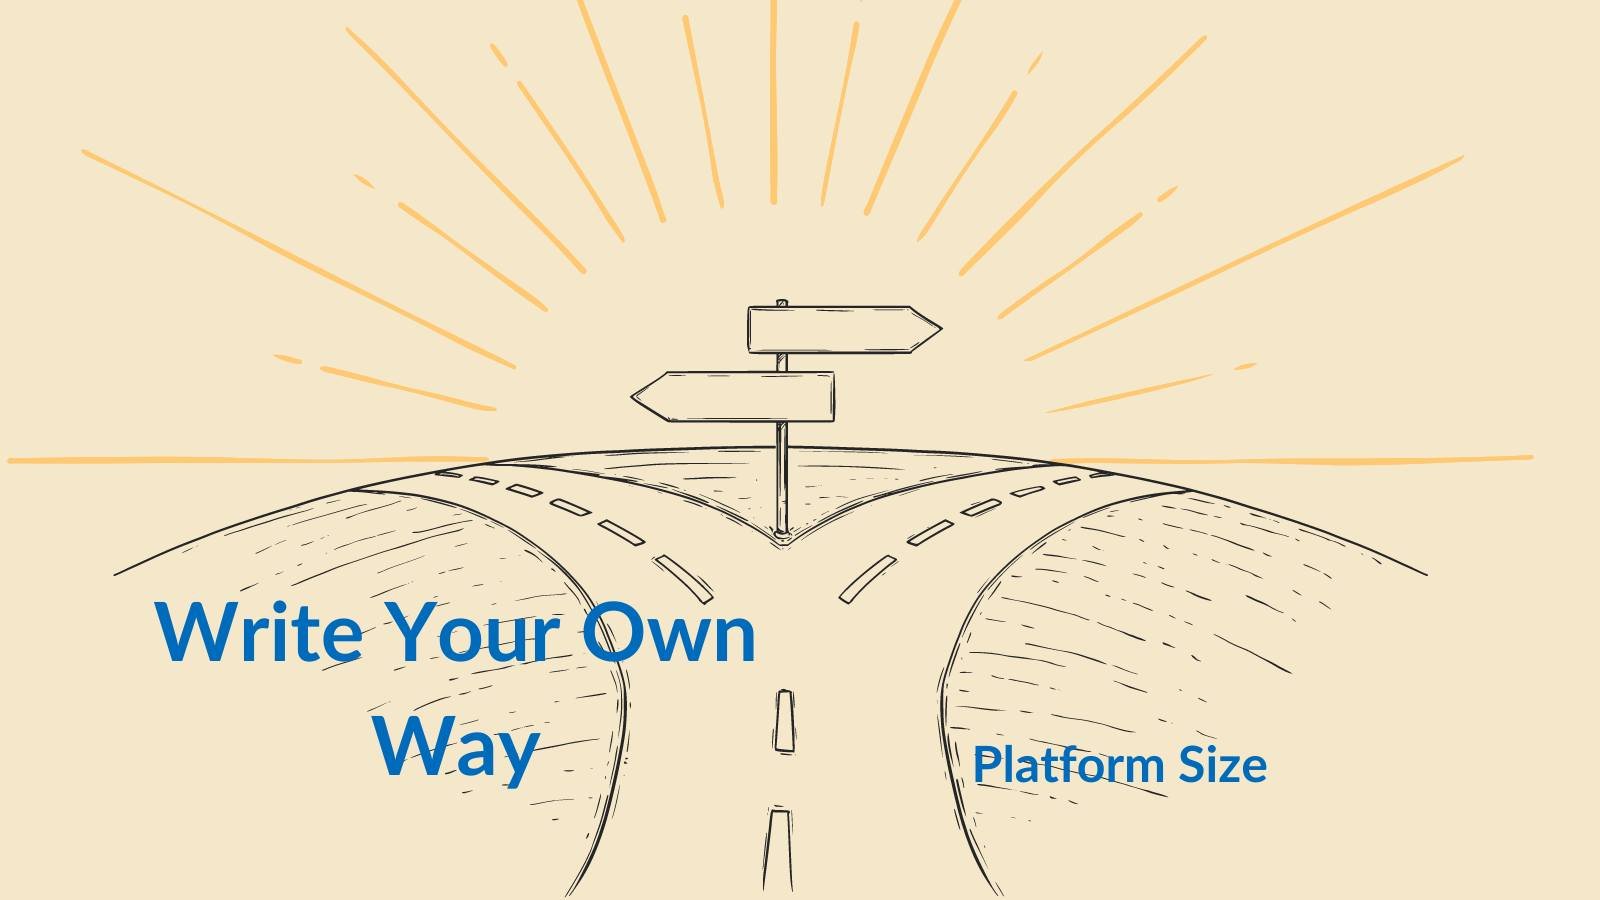 Building a platform can be stressful for a new author. Not to mention, it can be confusing to know exactly what you need to make your platform successful. We're talking about platform building, and how big your platform should be as a new author over